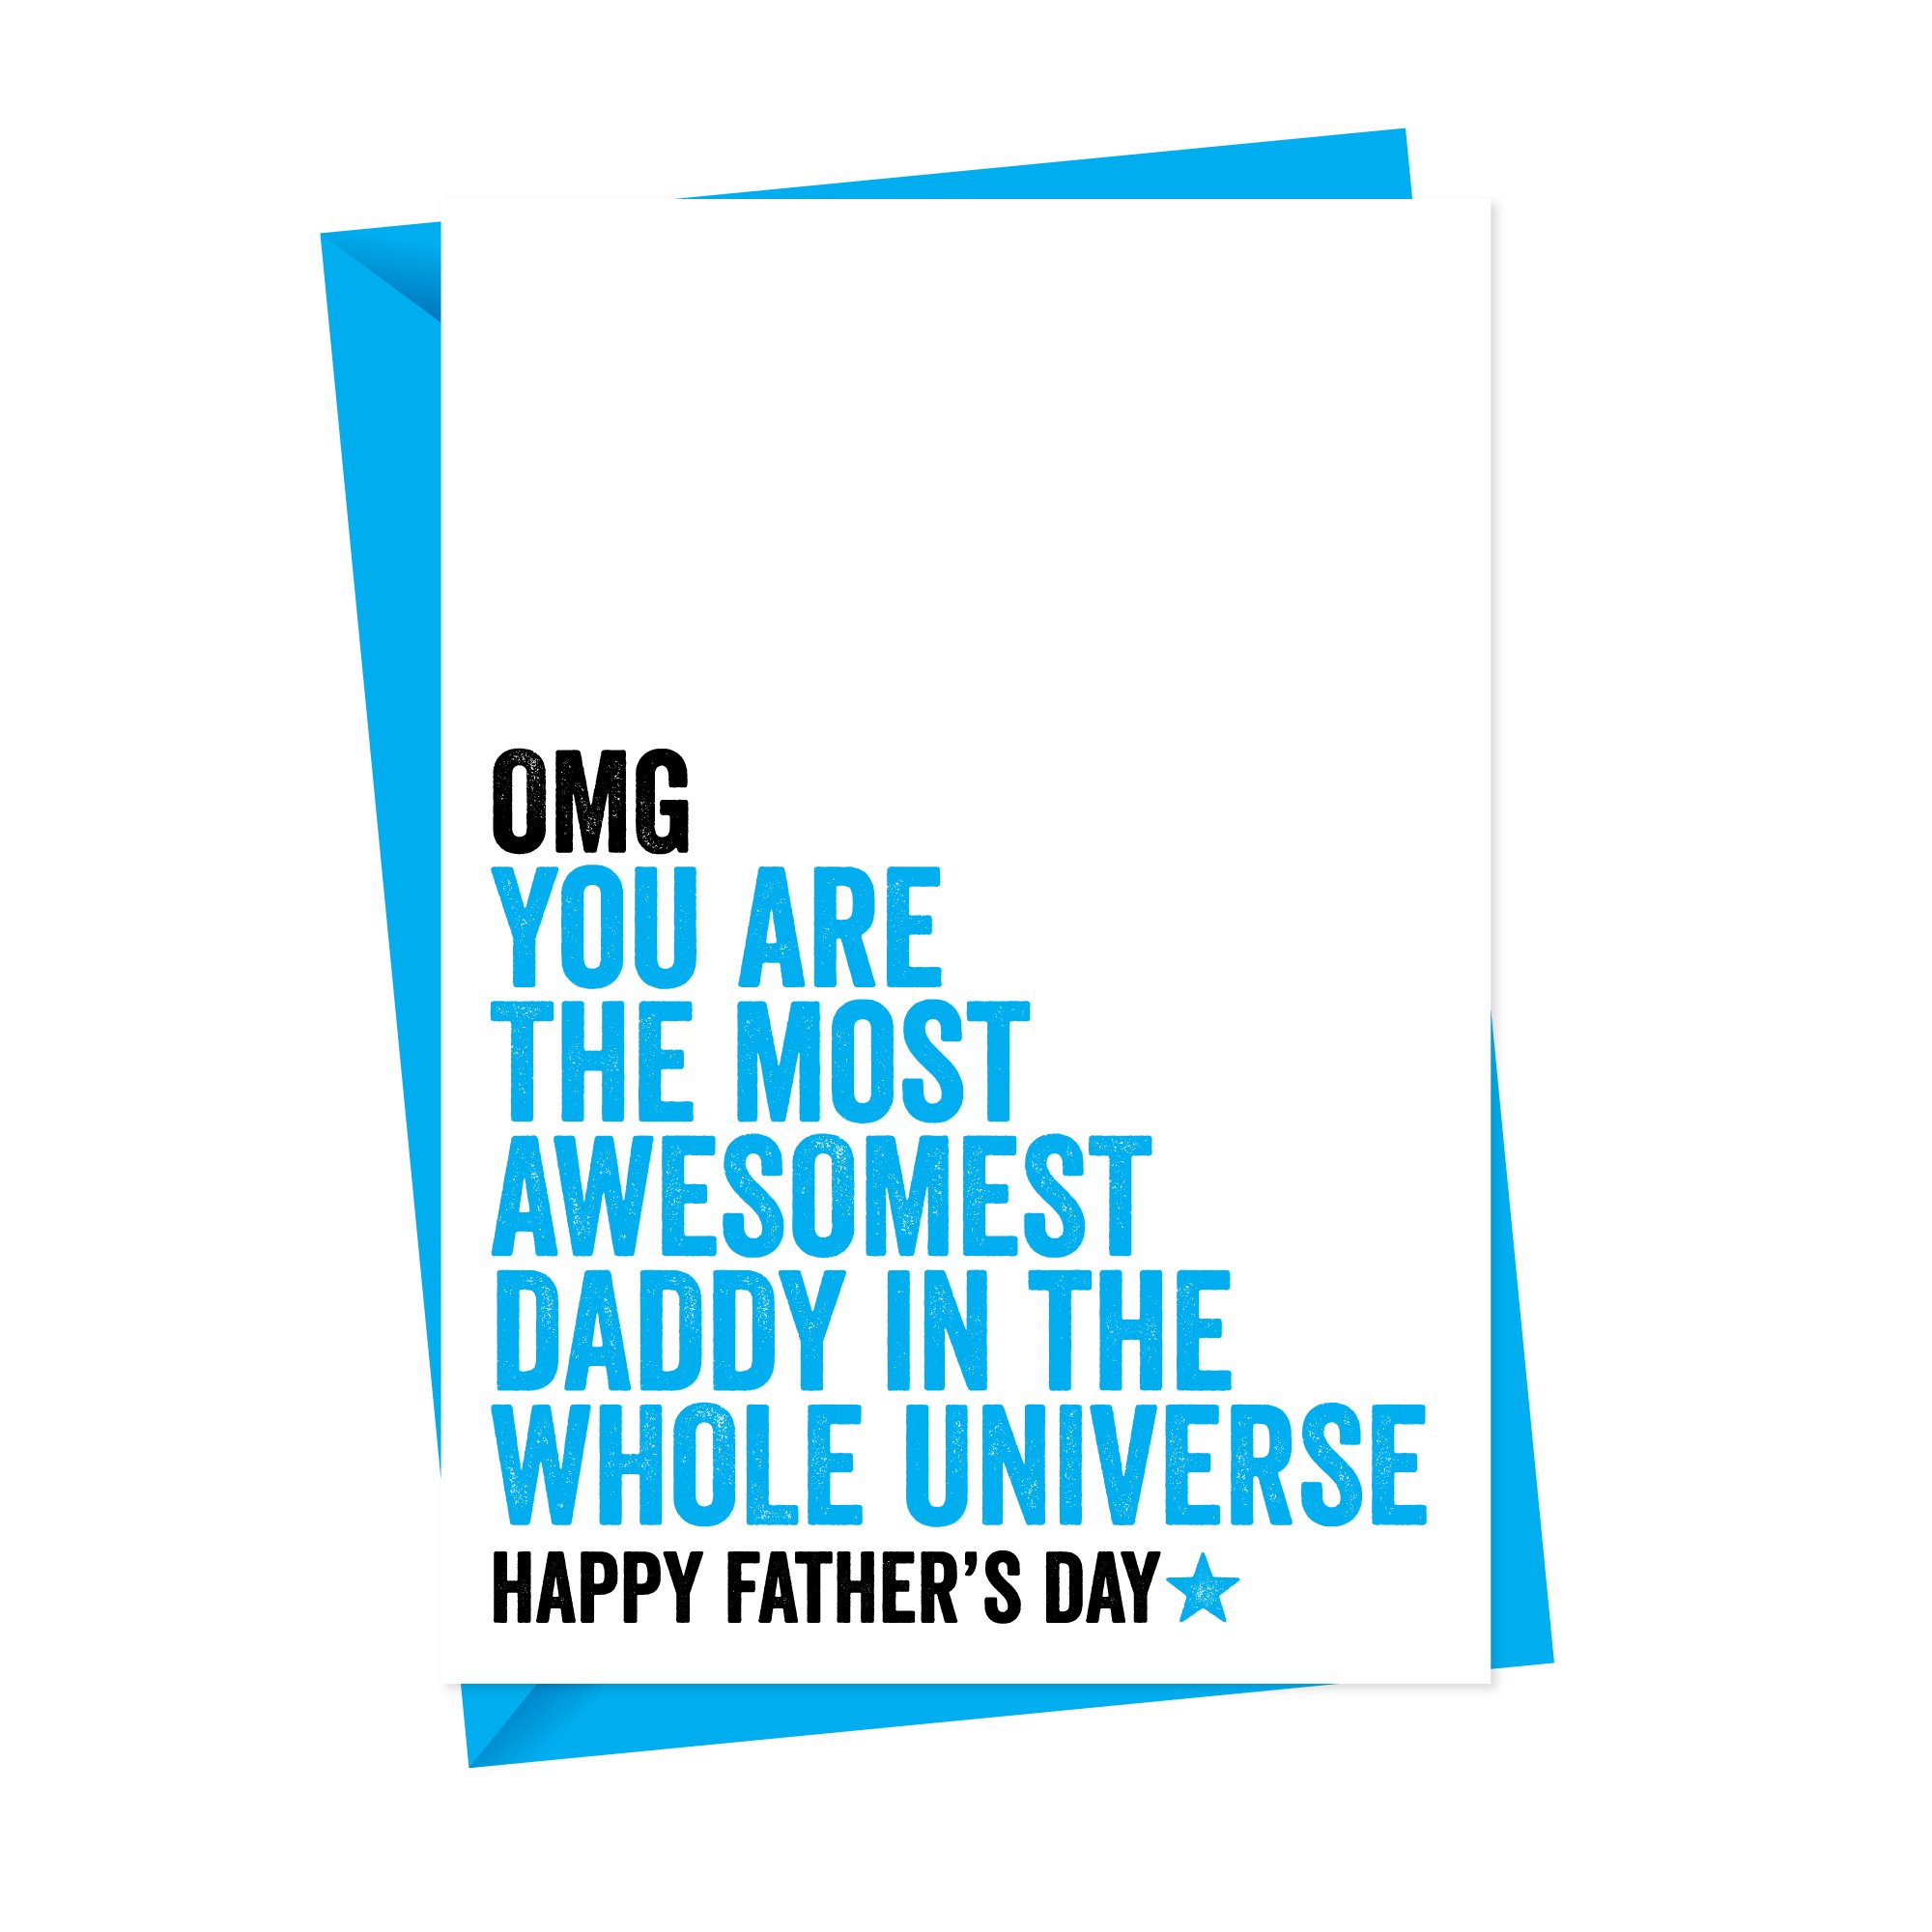 Awesomest Daddy in the Universe Fathers Day Card